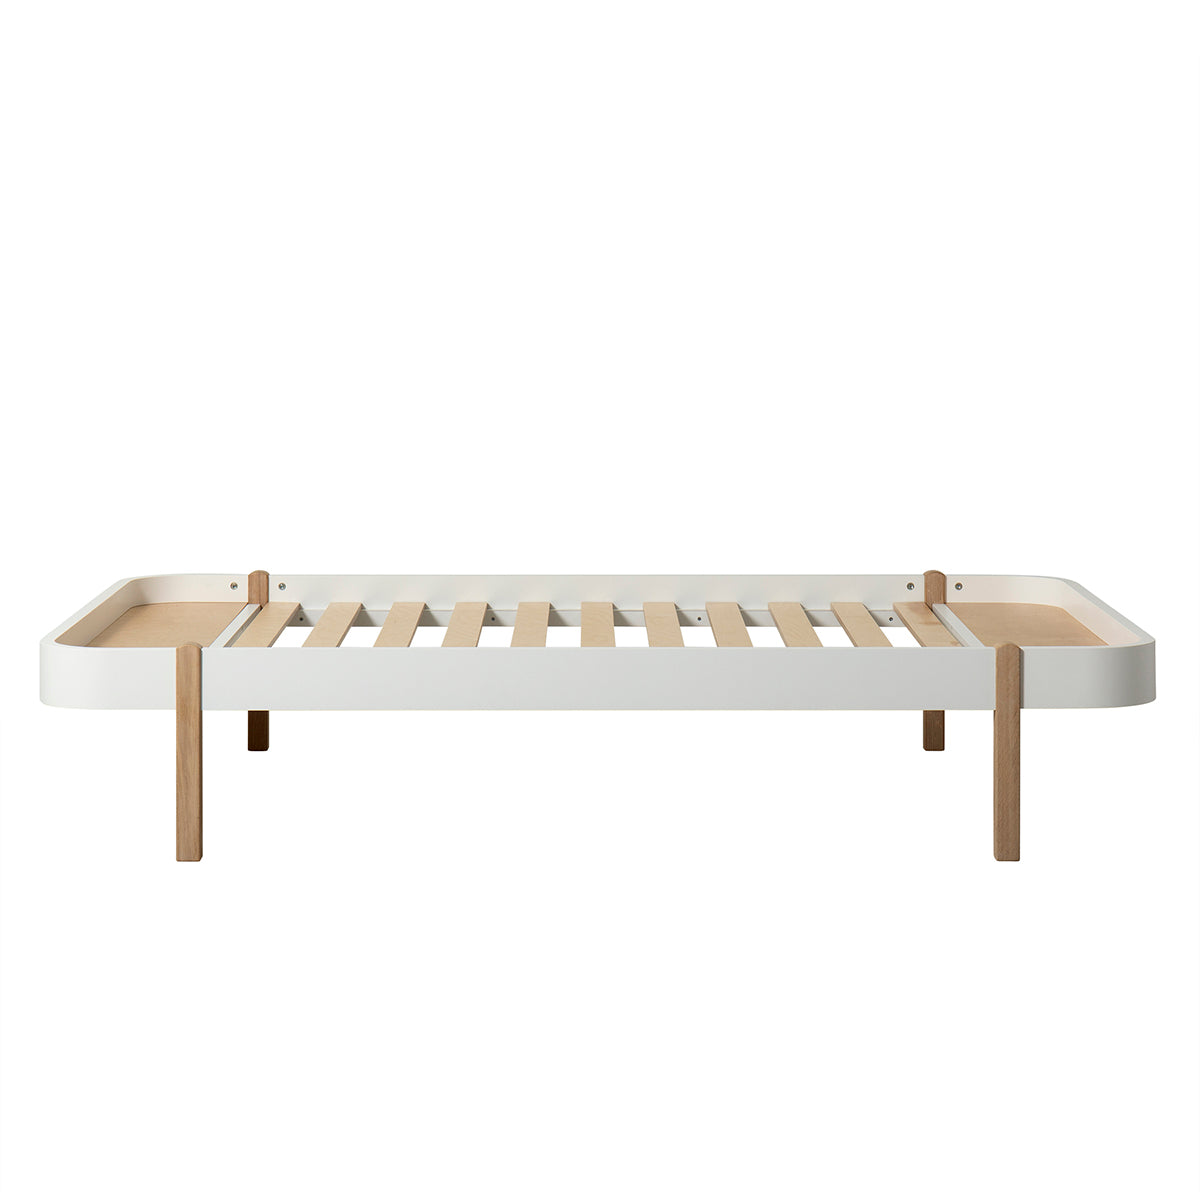 Oliver Furniture Wood Lounger, 120 x 200 cm, weiss/Eiche